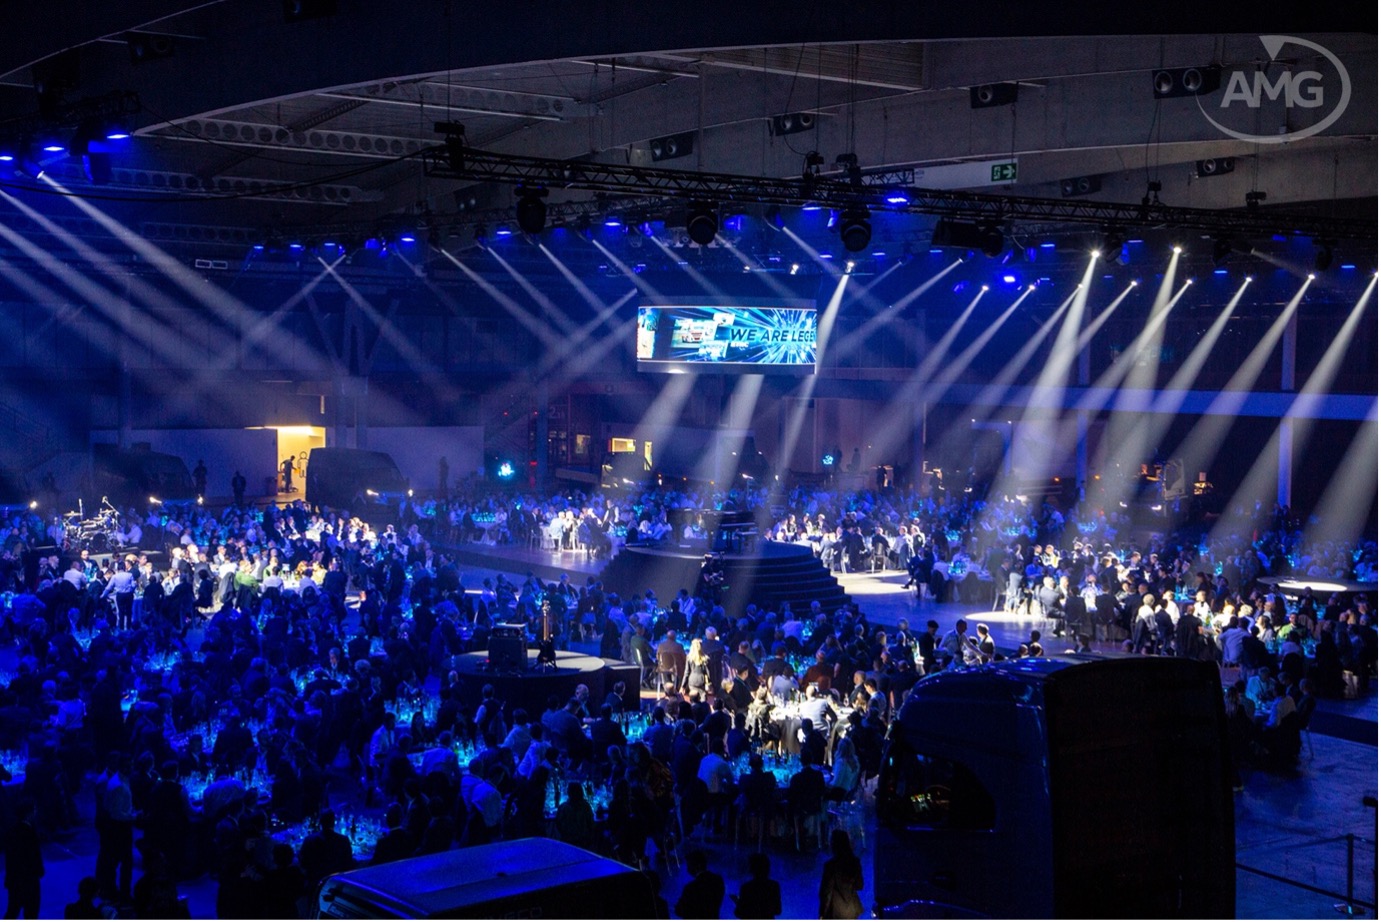 AMG deploys NEXO STM at Iveco ‘Be the change’ event for 1300 guests in Barcelona